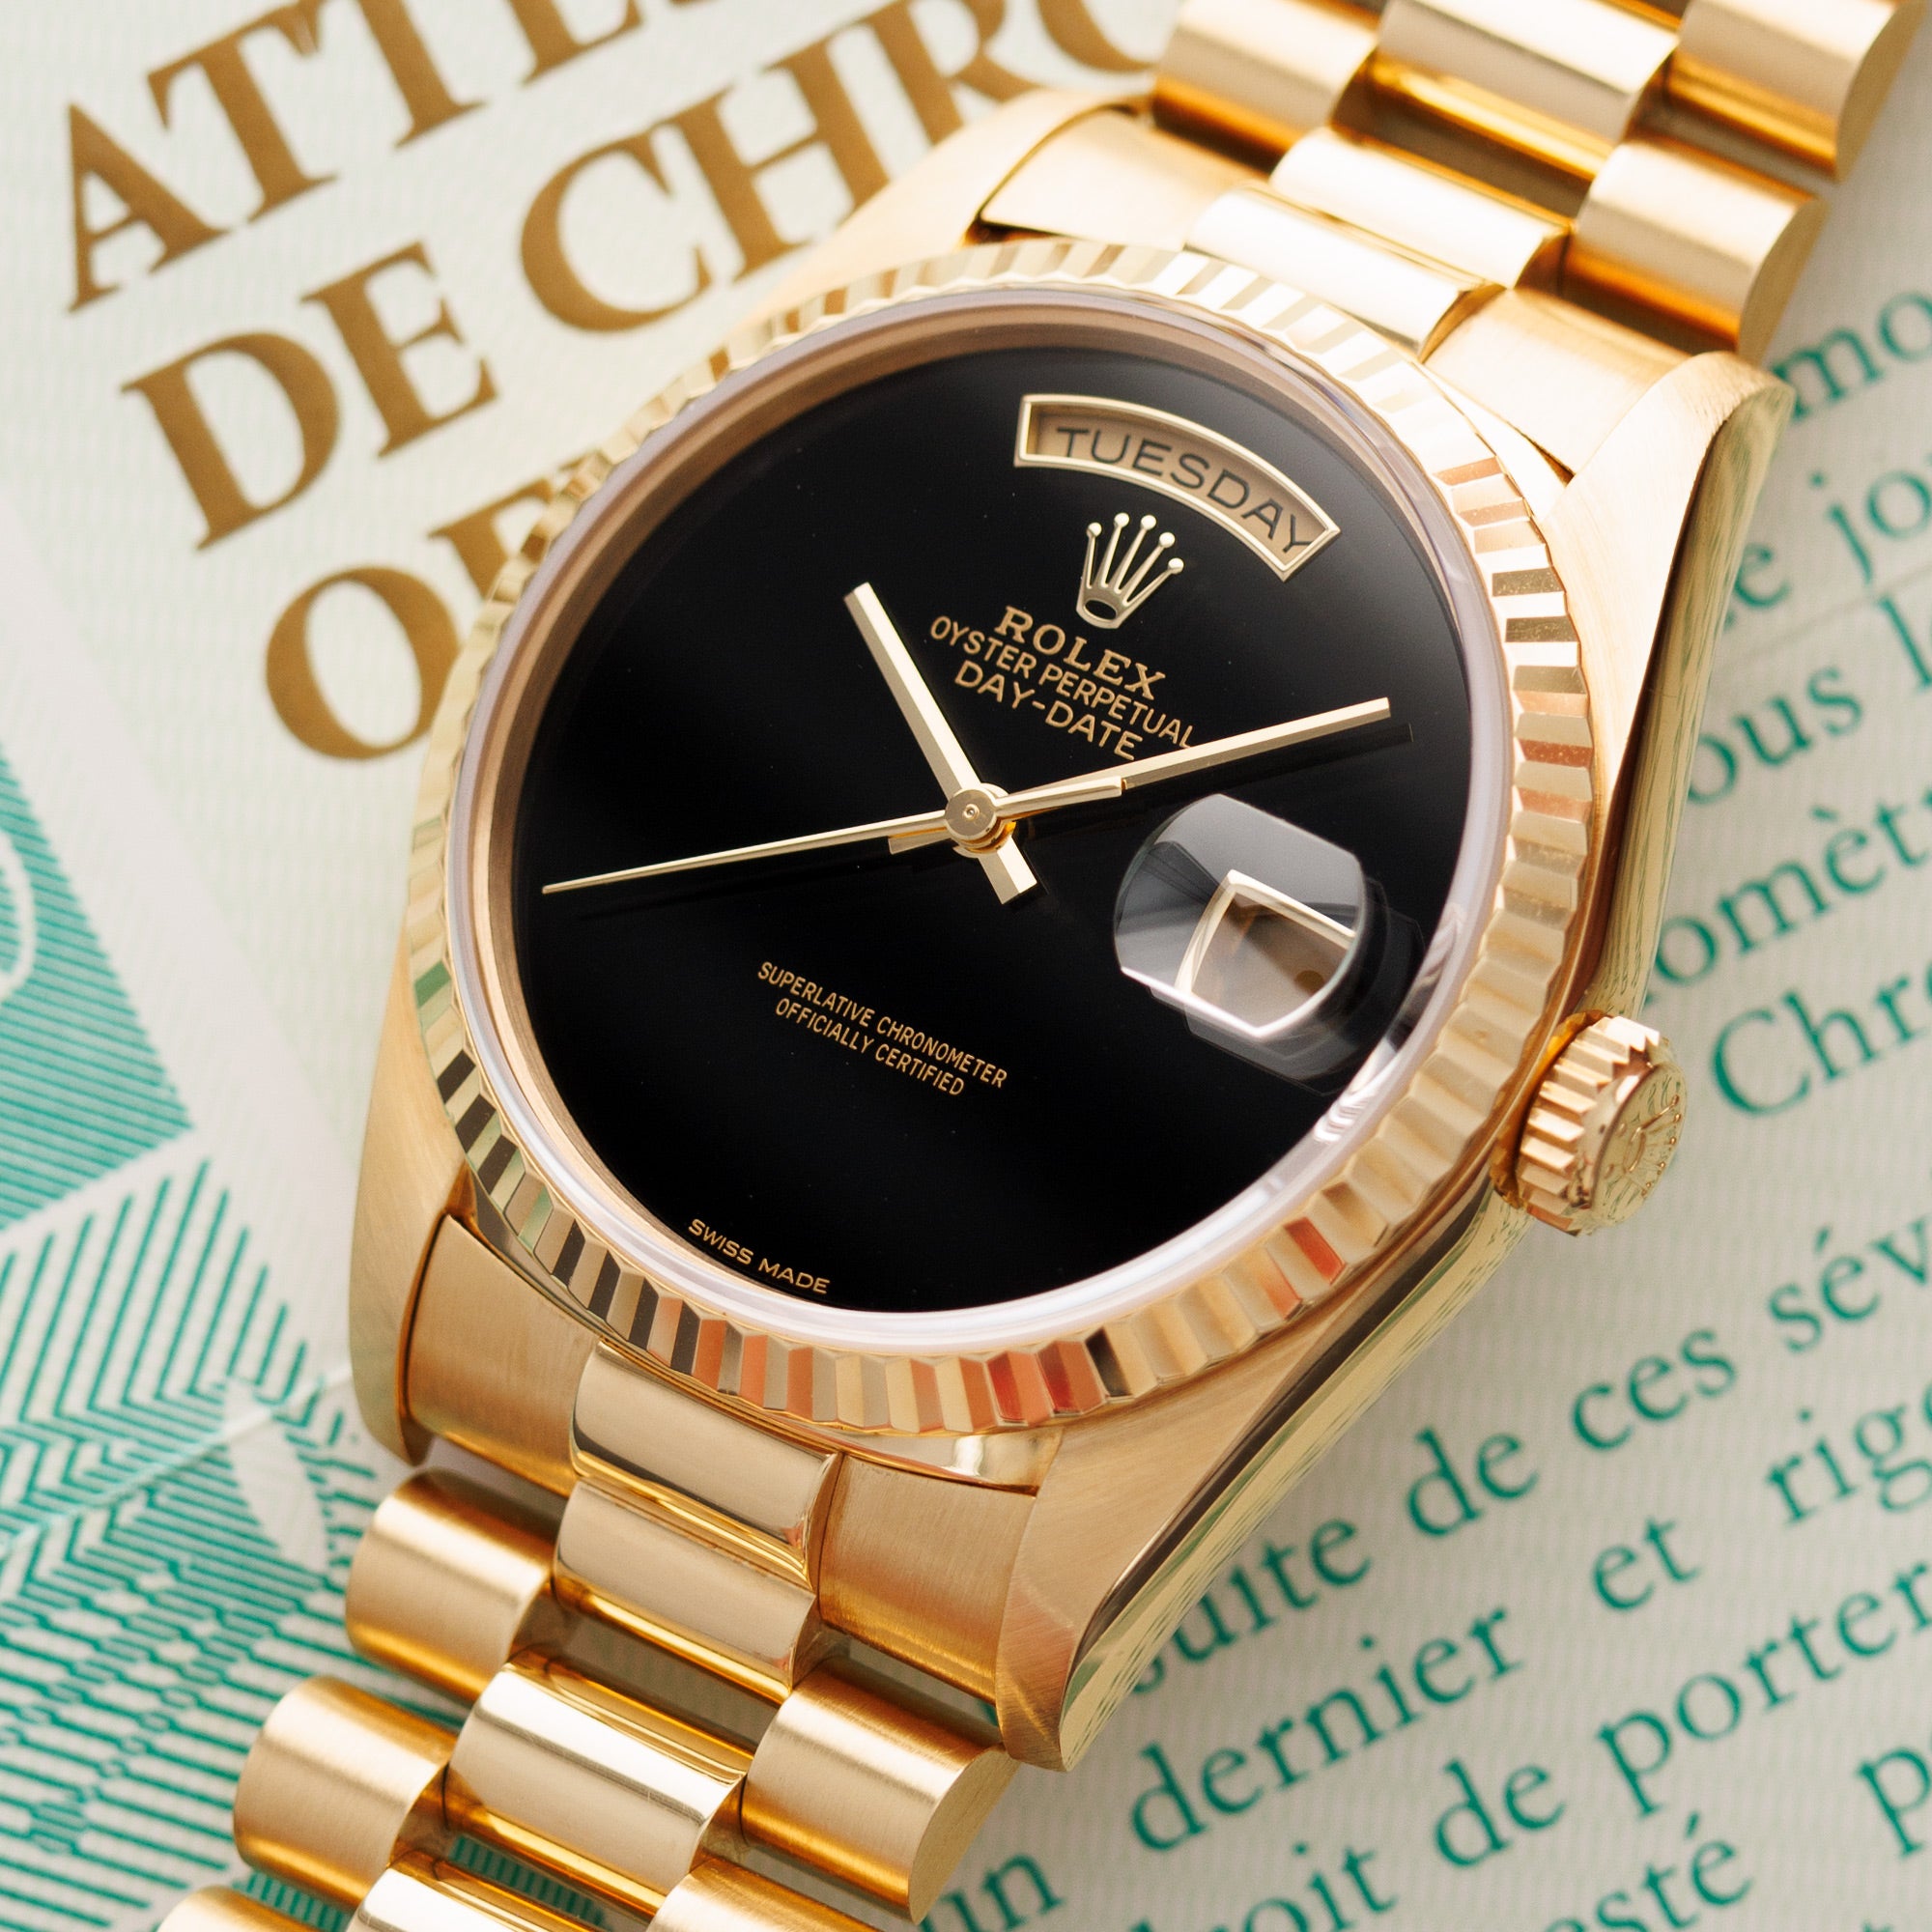 Rolex - Rolex Yellow Gold Day-Date Onyx Dial Watch Ref. 18238 - The Keystone Watches